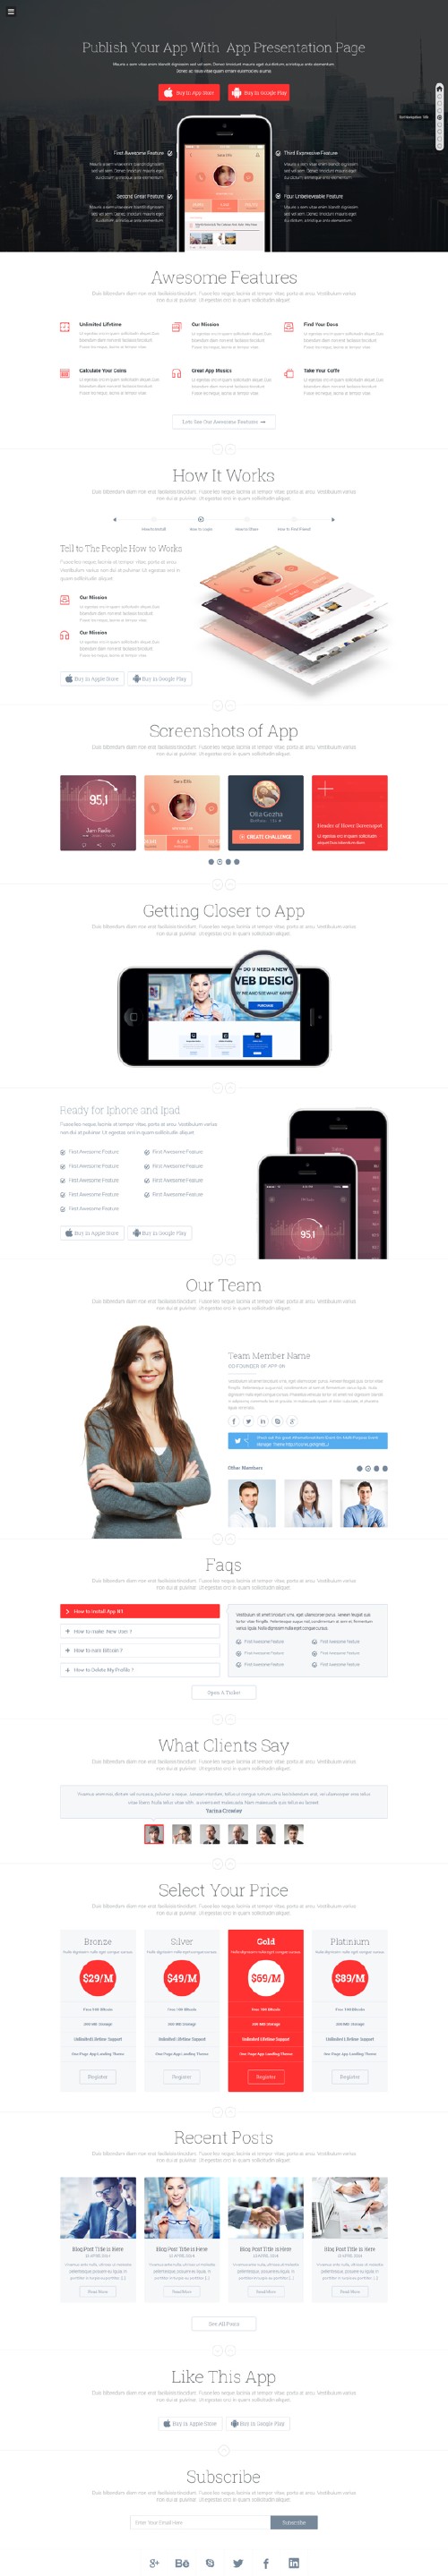 App On - One Page App Showcase PSD Template